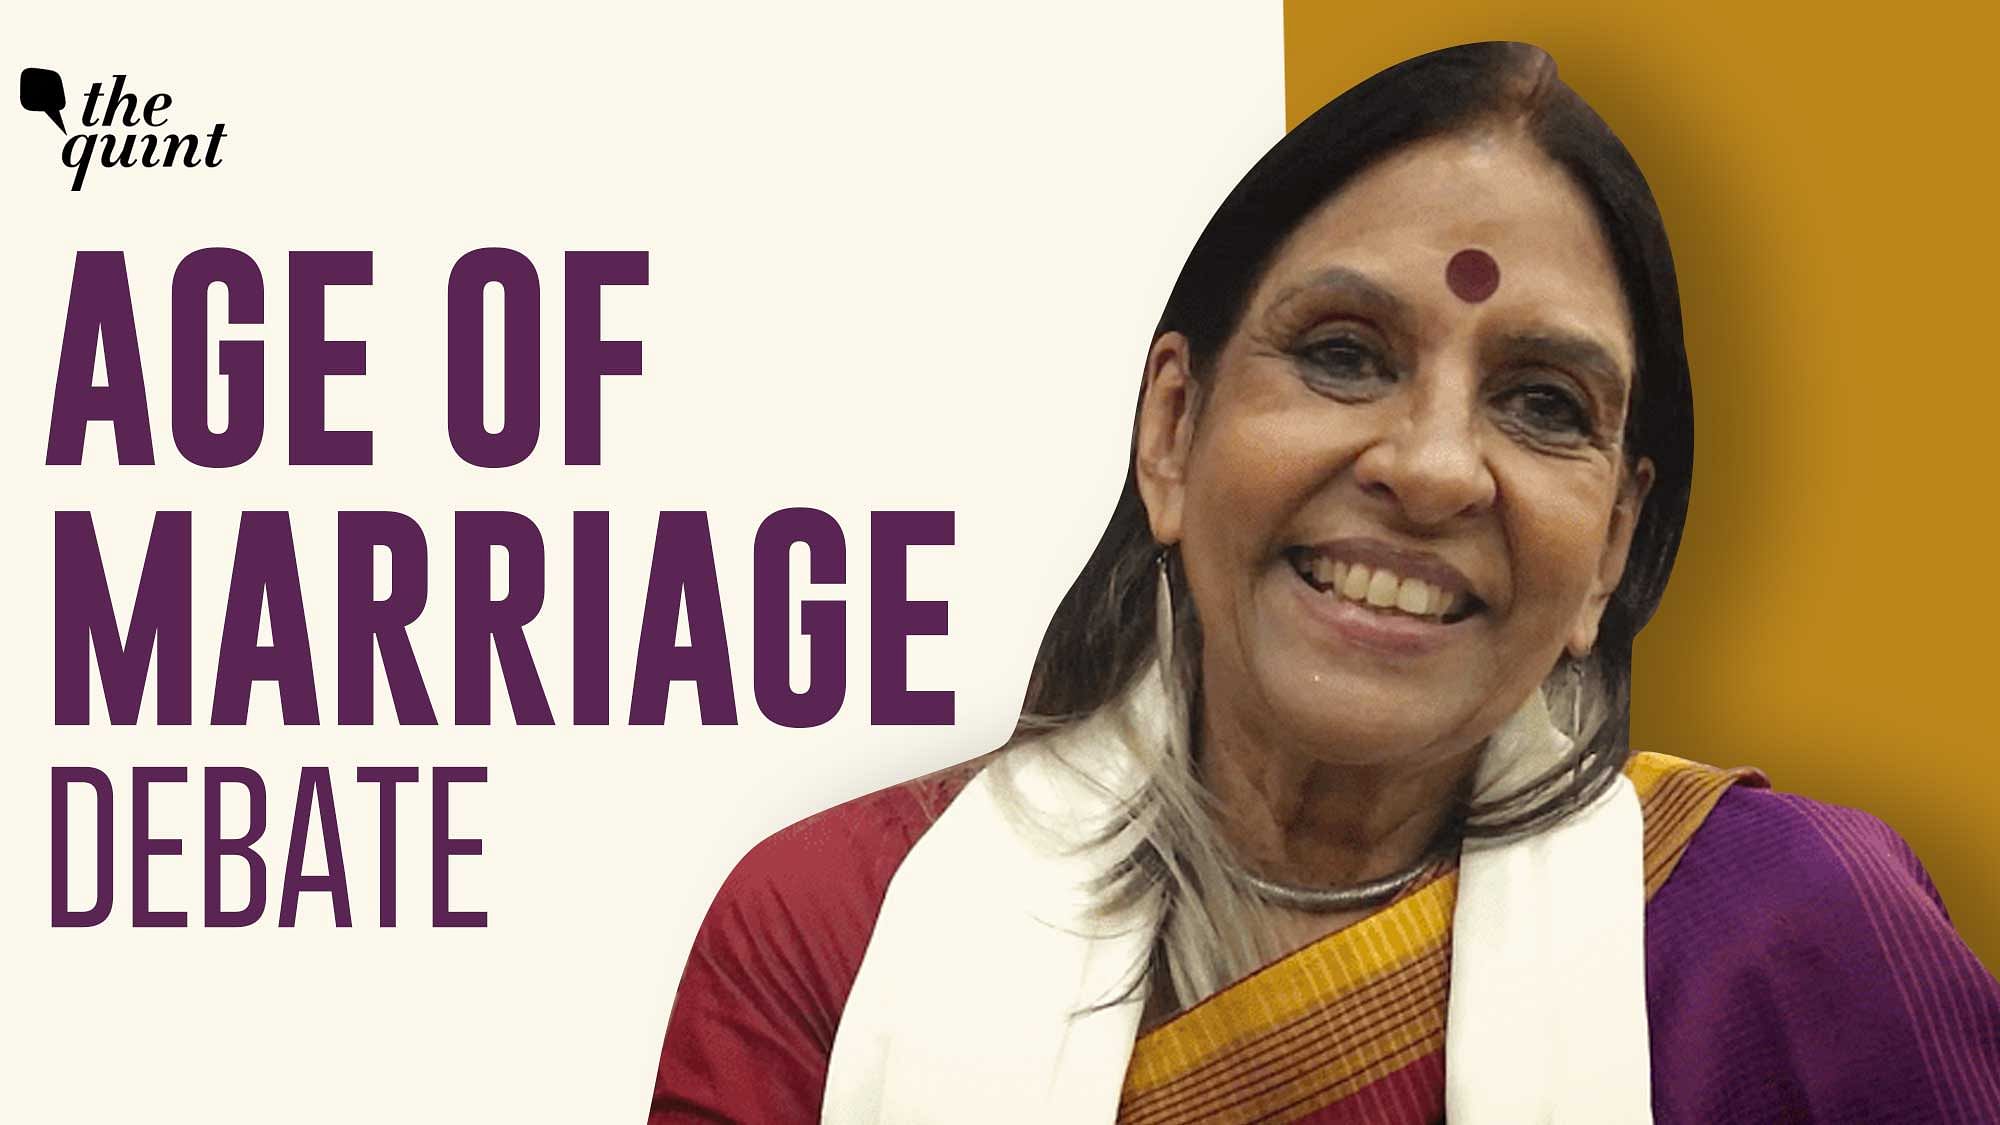 <div class="paragraphs"><p>In an interview with <strong>The Quint</strong>, former Samata Party President Jaya Jaitly, who headed the 10-member task force that recommended changing age of marriage from 18 to 21, takes on criticism against the move.</p></div>